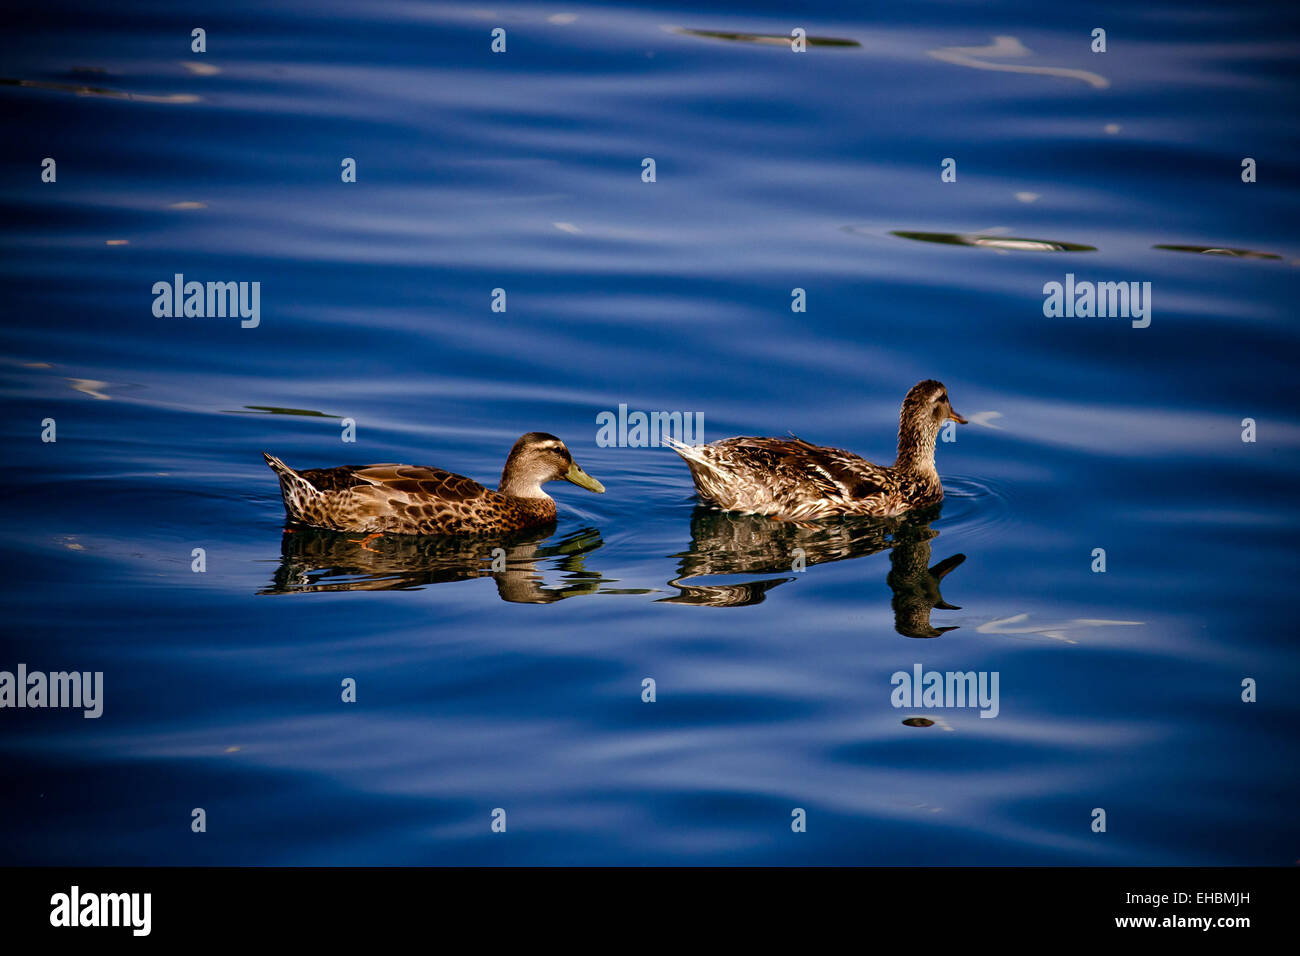 Two ducks floating on blue water surface Stock Photo